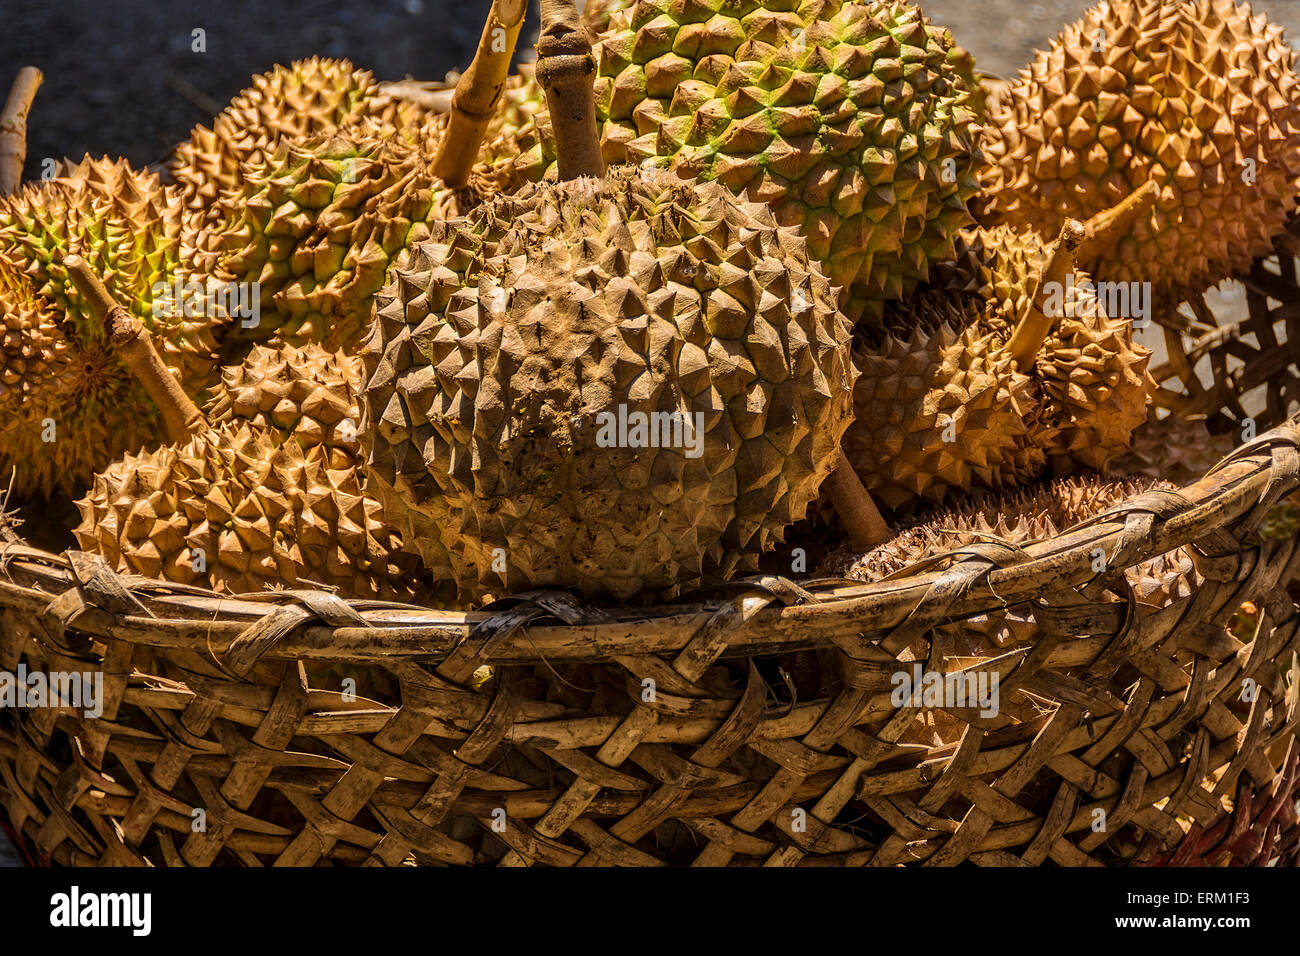 Basket of spiky and smelly Durian for sale in a local market Stock Photo